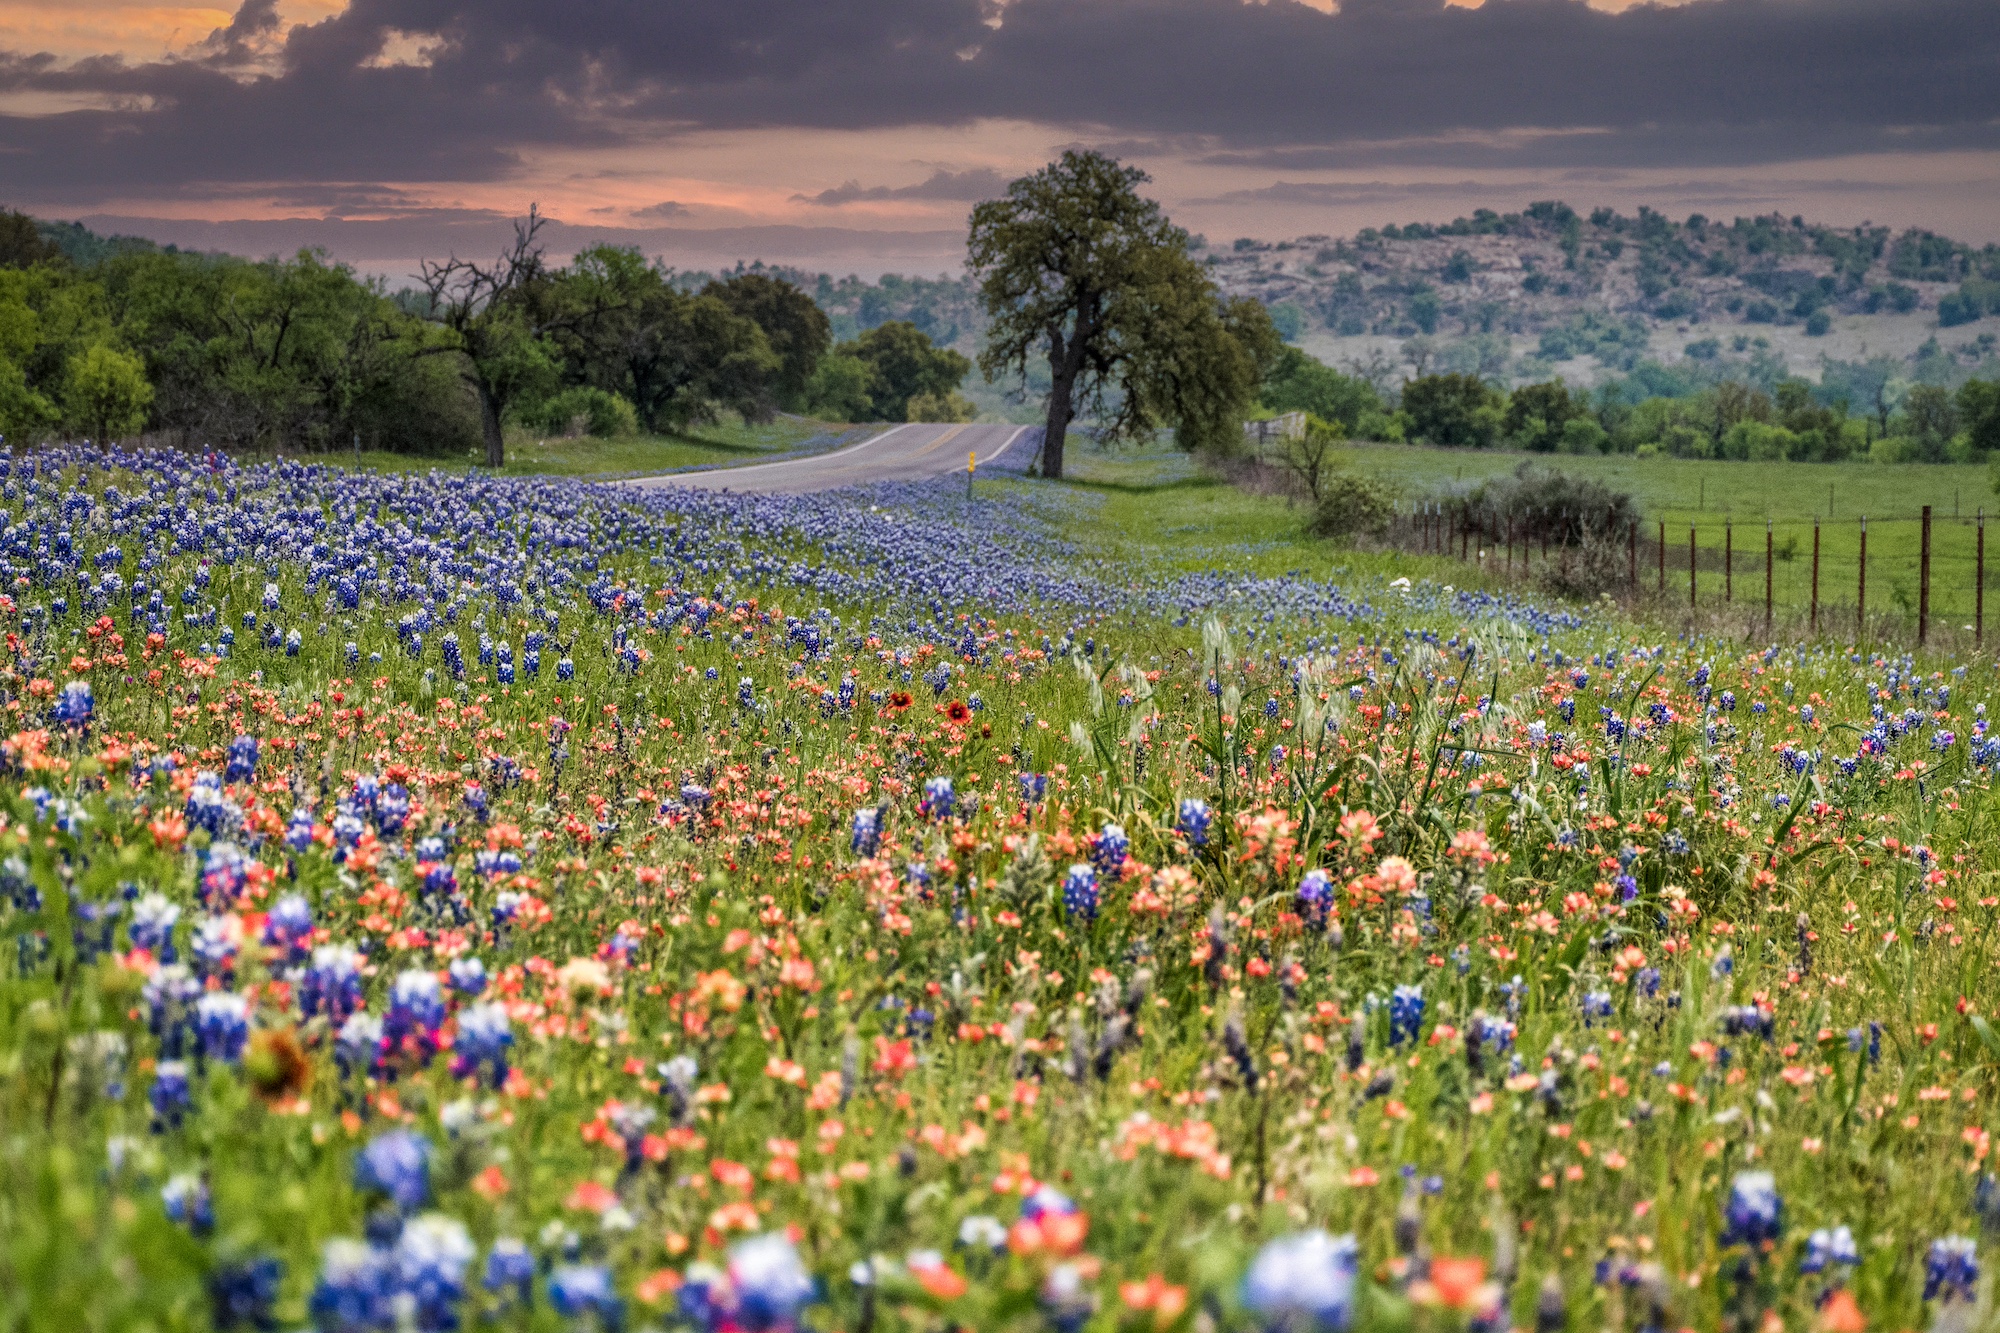 Bluebonnets and Indian Paint Brush in bloom beside a road in the hill country of Texas at dusk